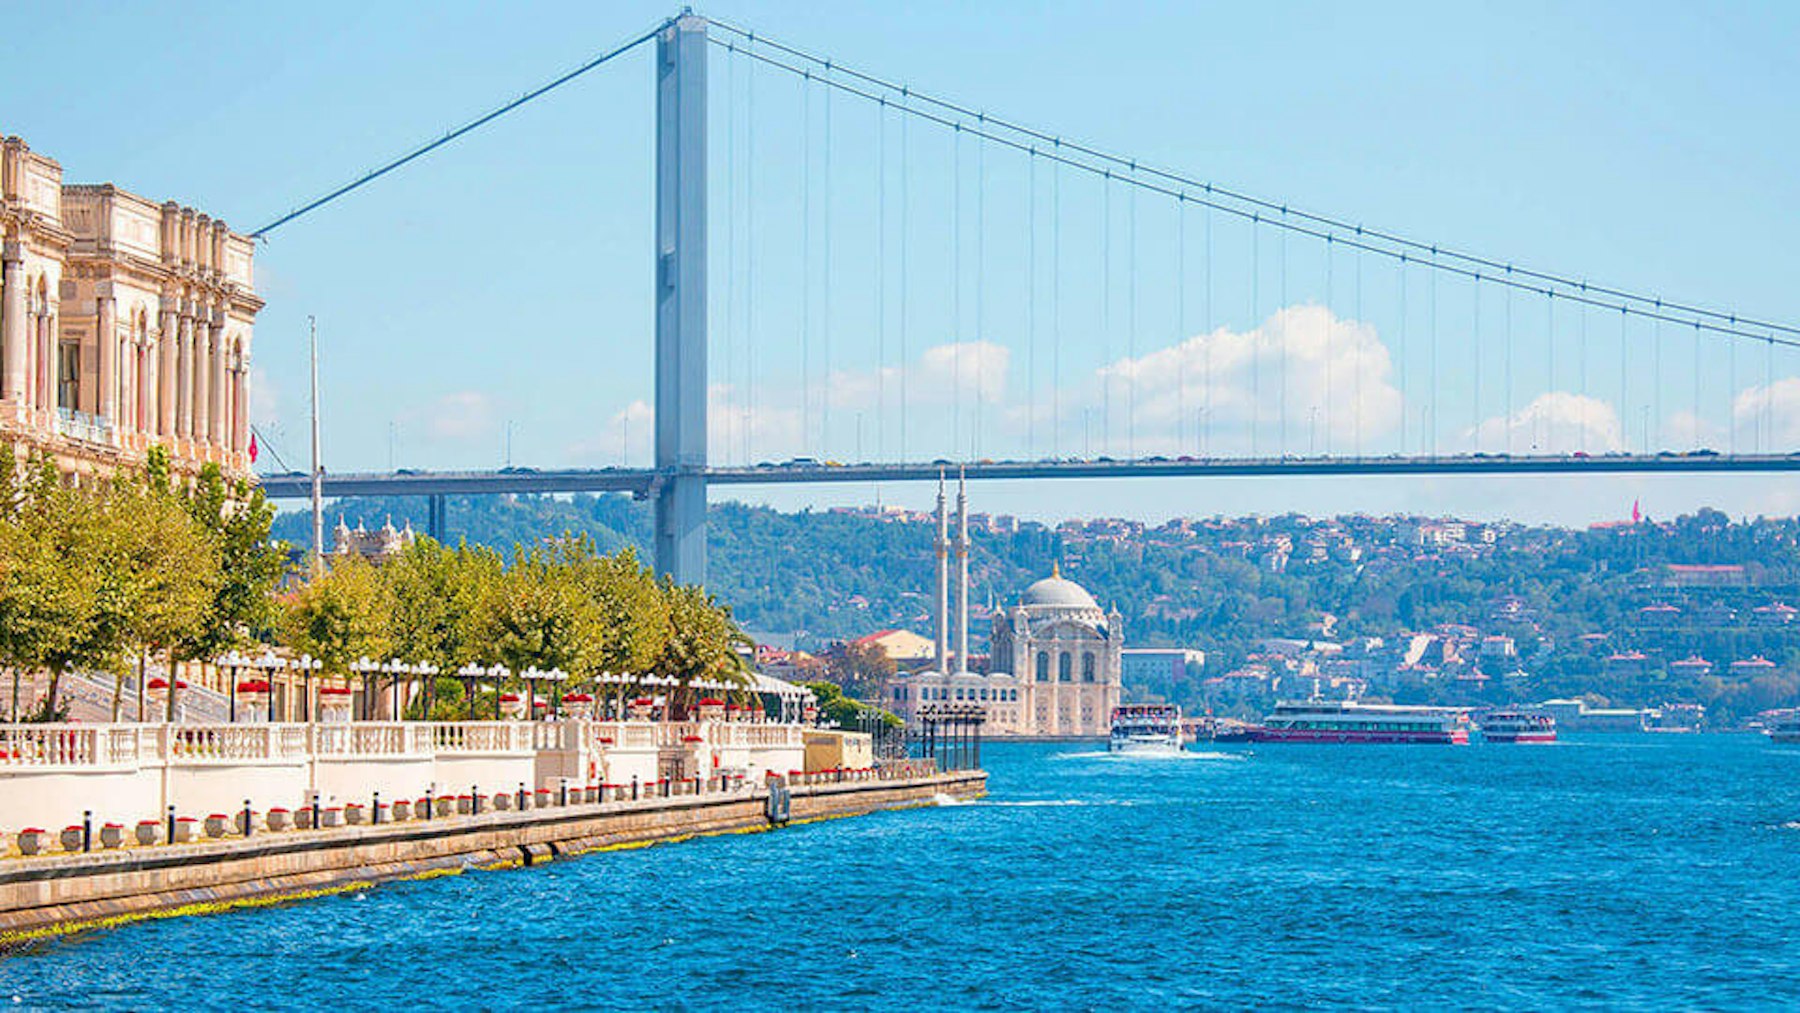 Bosphorus Cruise Tickets & Tours Mobile Tickets Sightseeing Cruises